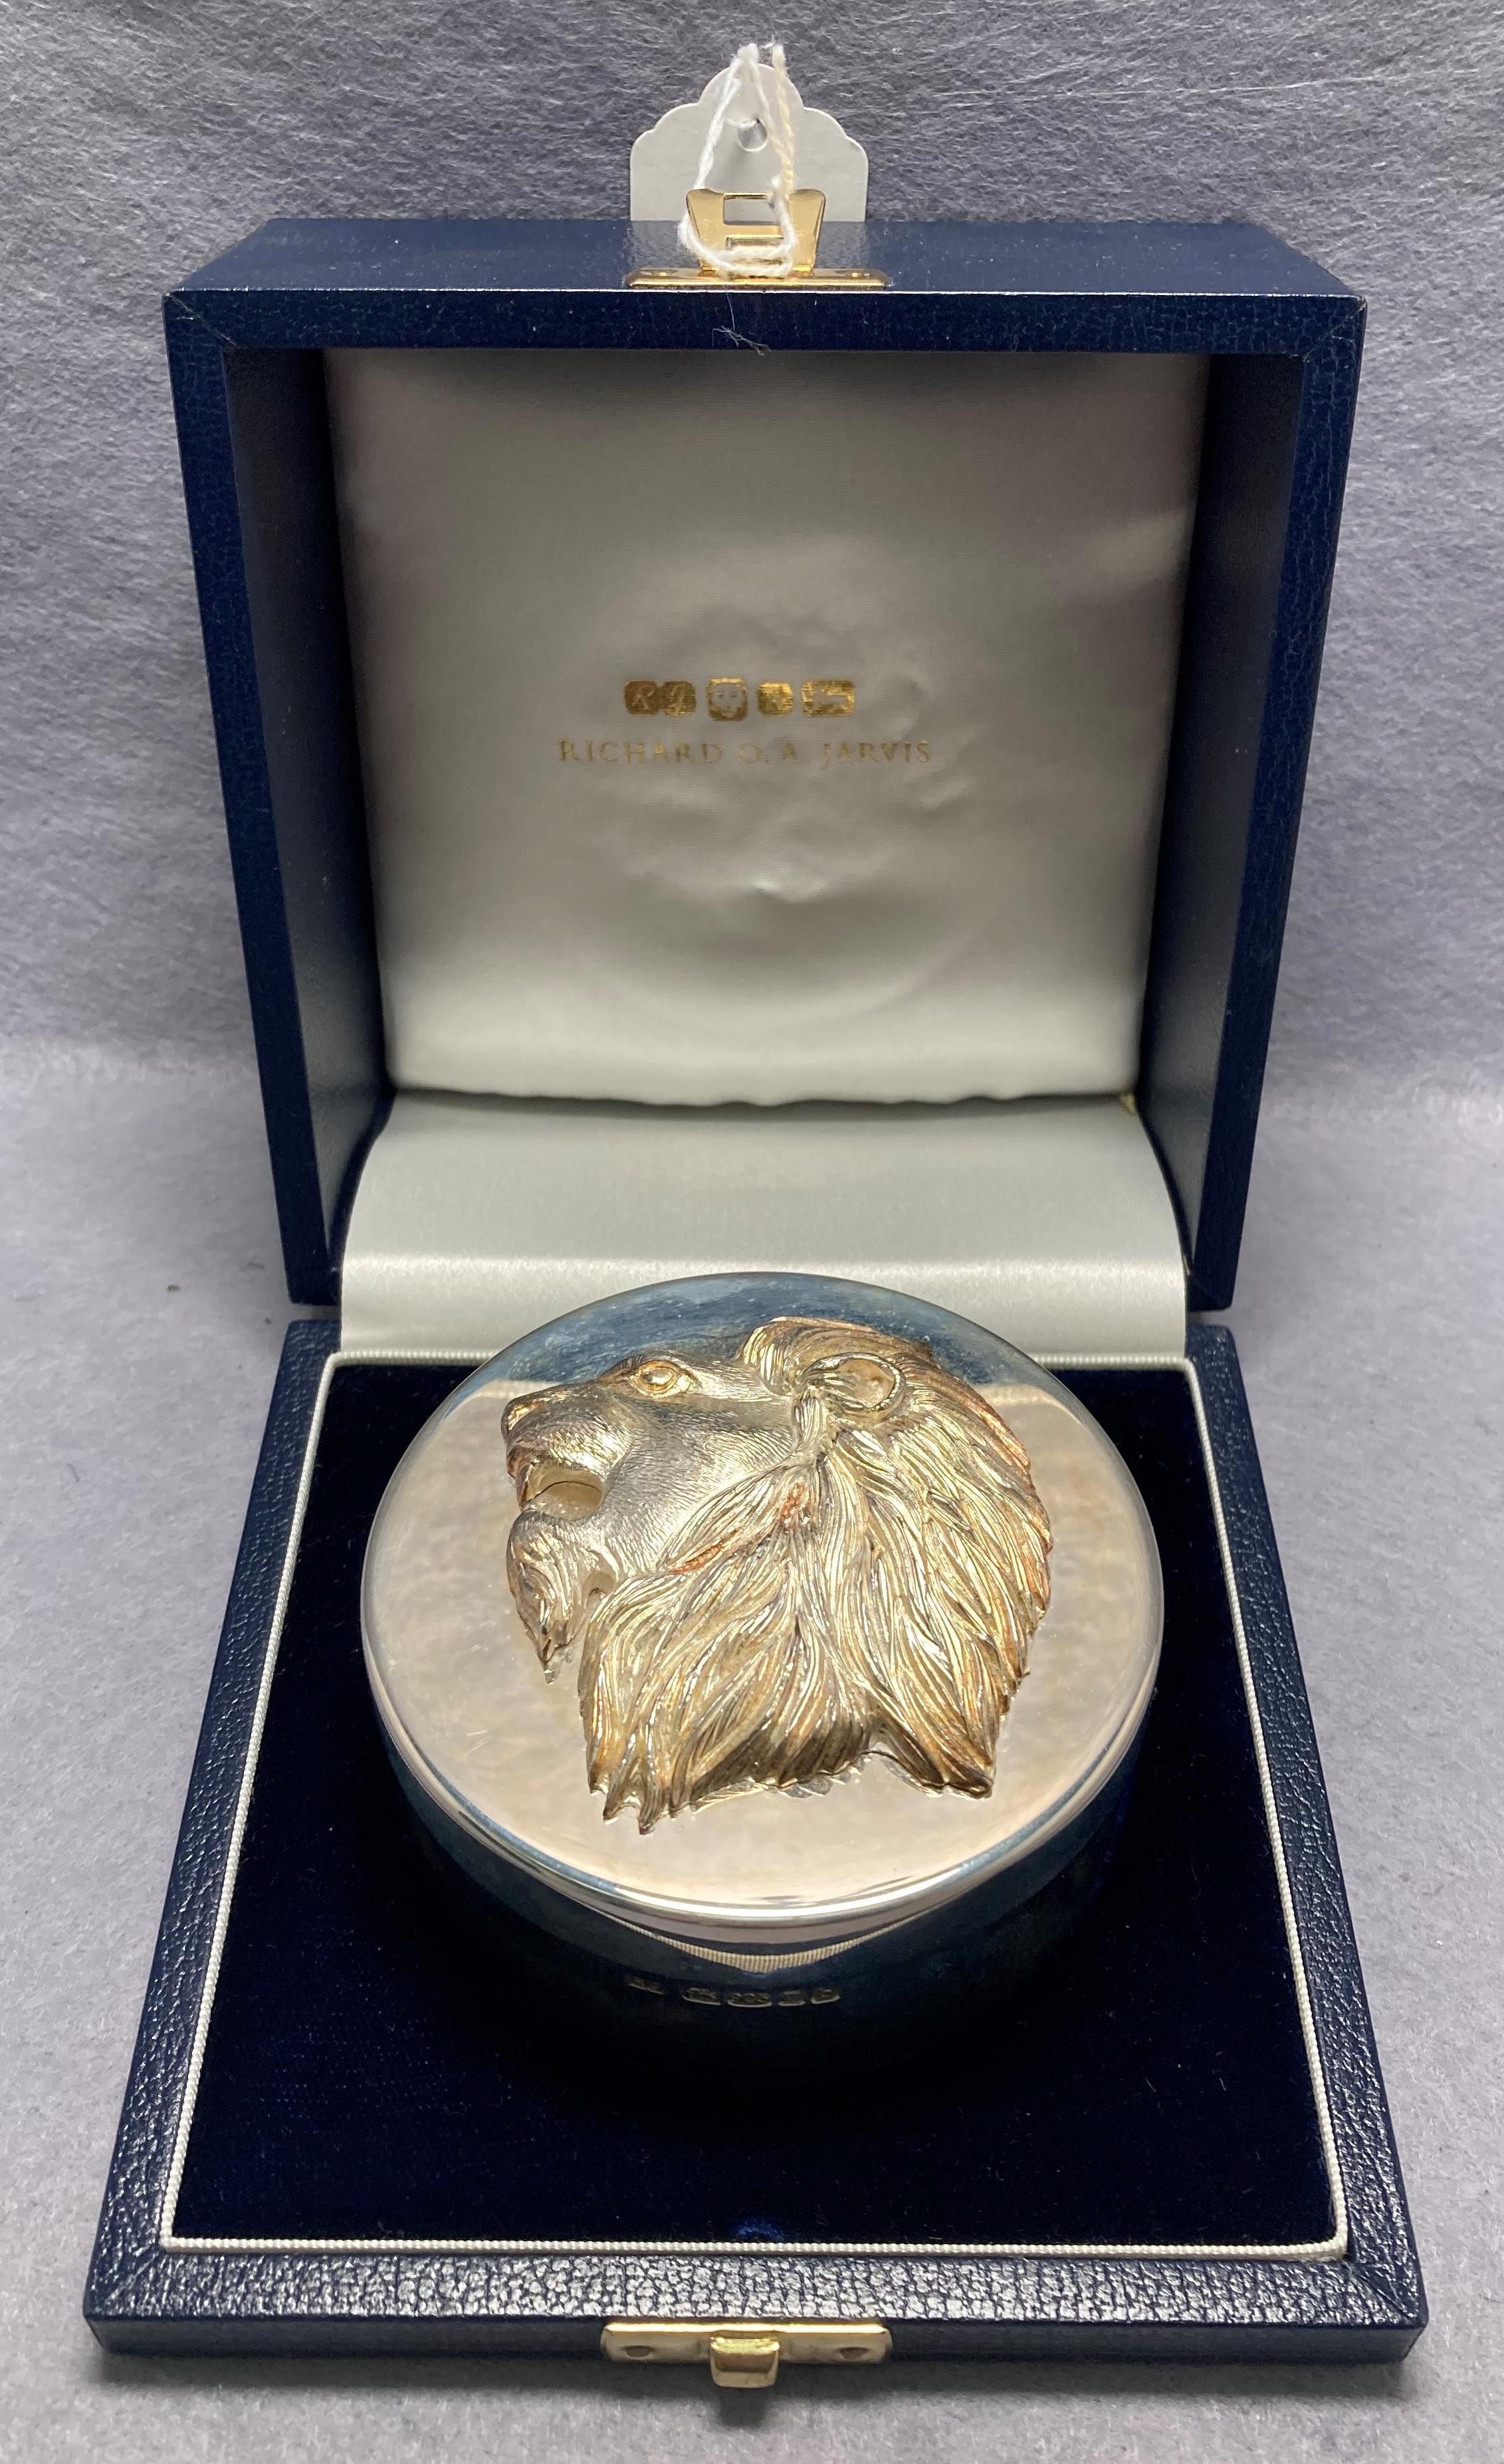 Silver [hallmarked] circular box with lions head lid in display case by RICHARD O A JARVIS.